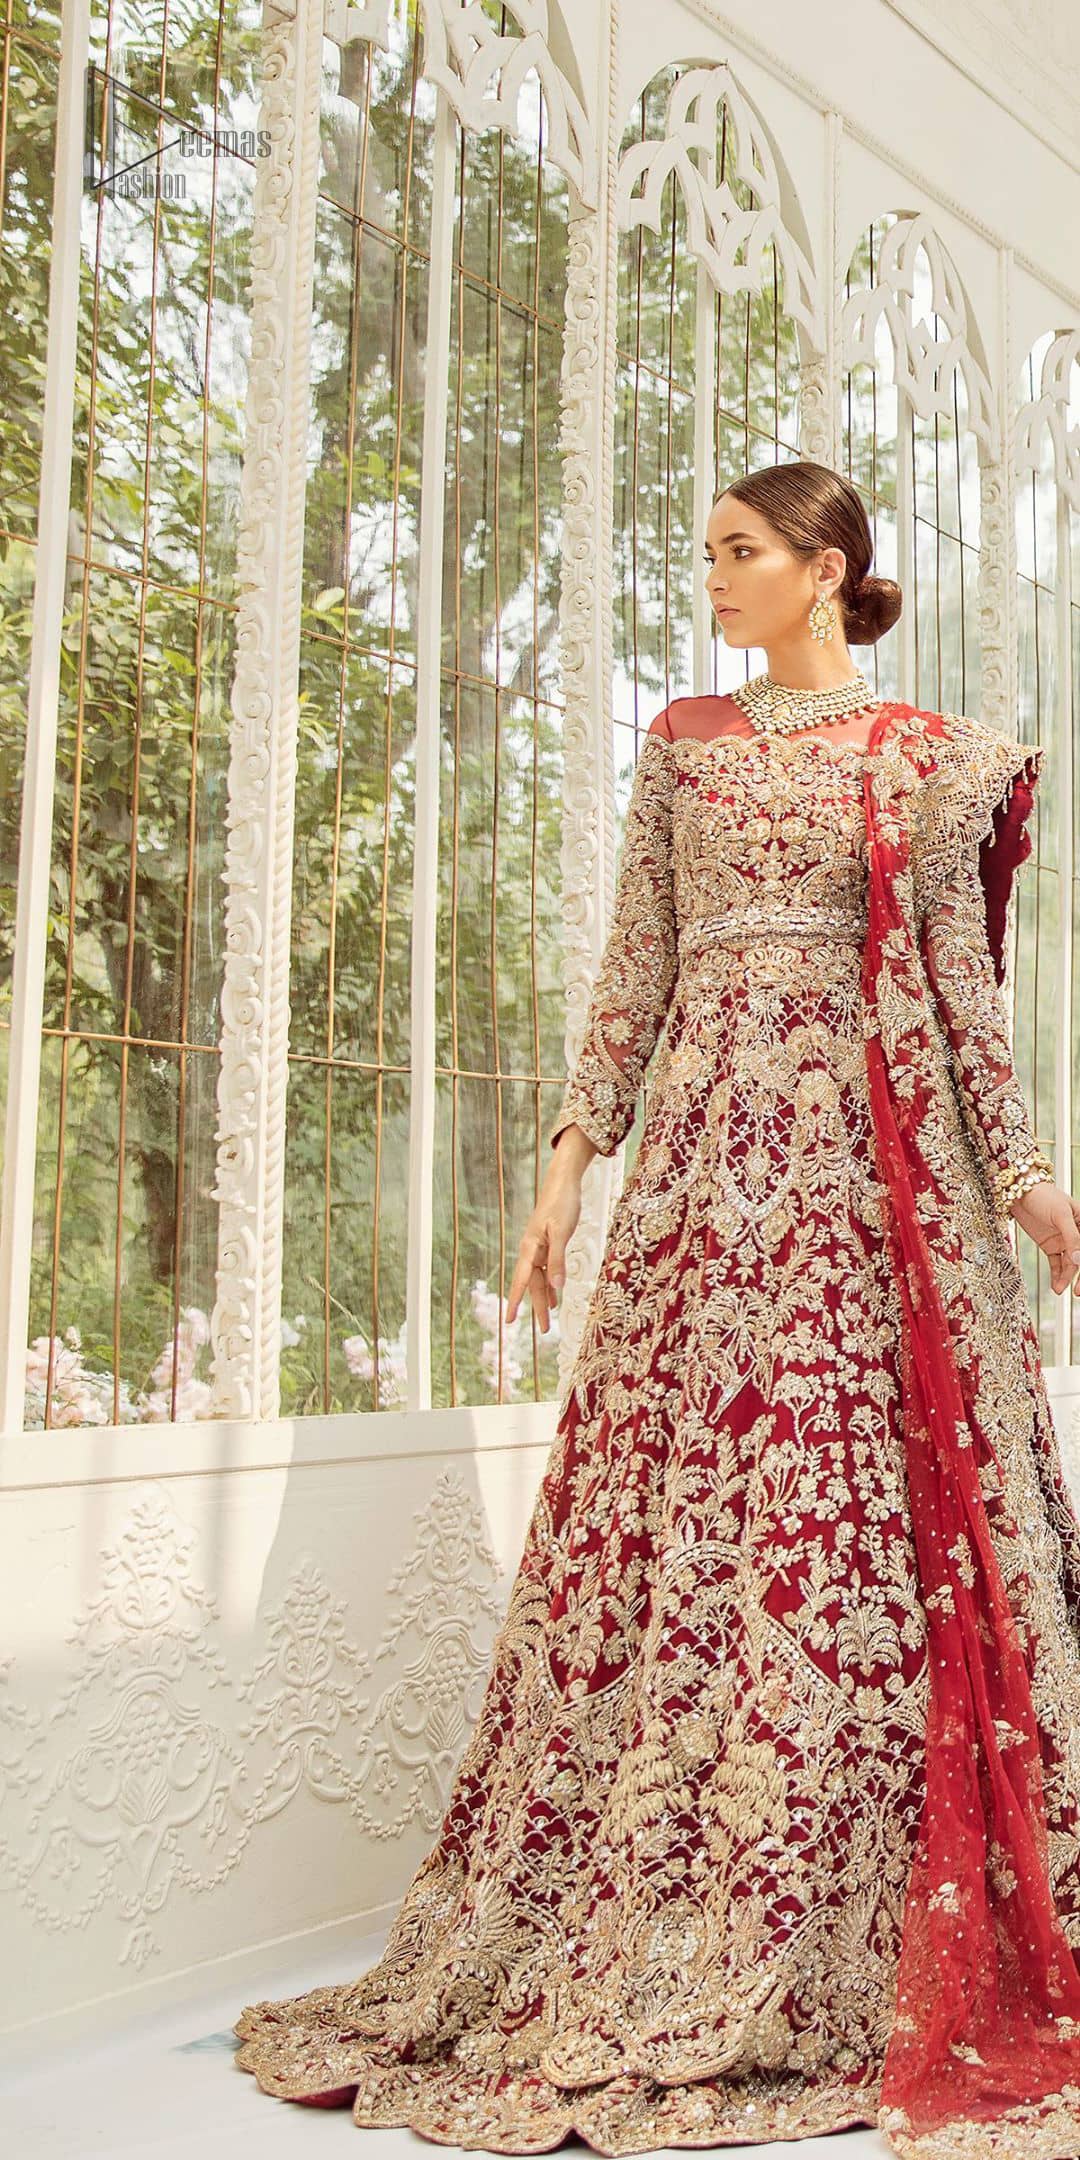 This bridal dress is perfect for your big day. Our bride makes a statement in this stunningly floraison, perfect blend of glamour and tradition with outstanding craftsmanship and gorgeous detailing. This floor length maxi is beautifully sculptured floral jhaal, floral bunches and thick scalloped hemline done with light golden kora, dabka, tilla and sequins embroidery. Exude elegance with red lehenga finessed with beautiful embellished scalloped bottom with zardosi work. The red net dupatta with chann and finishing all around the edges makes the look complete.